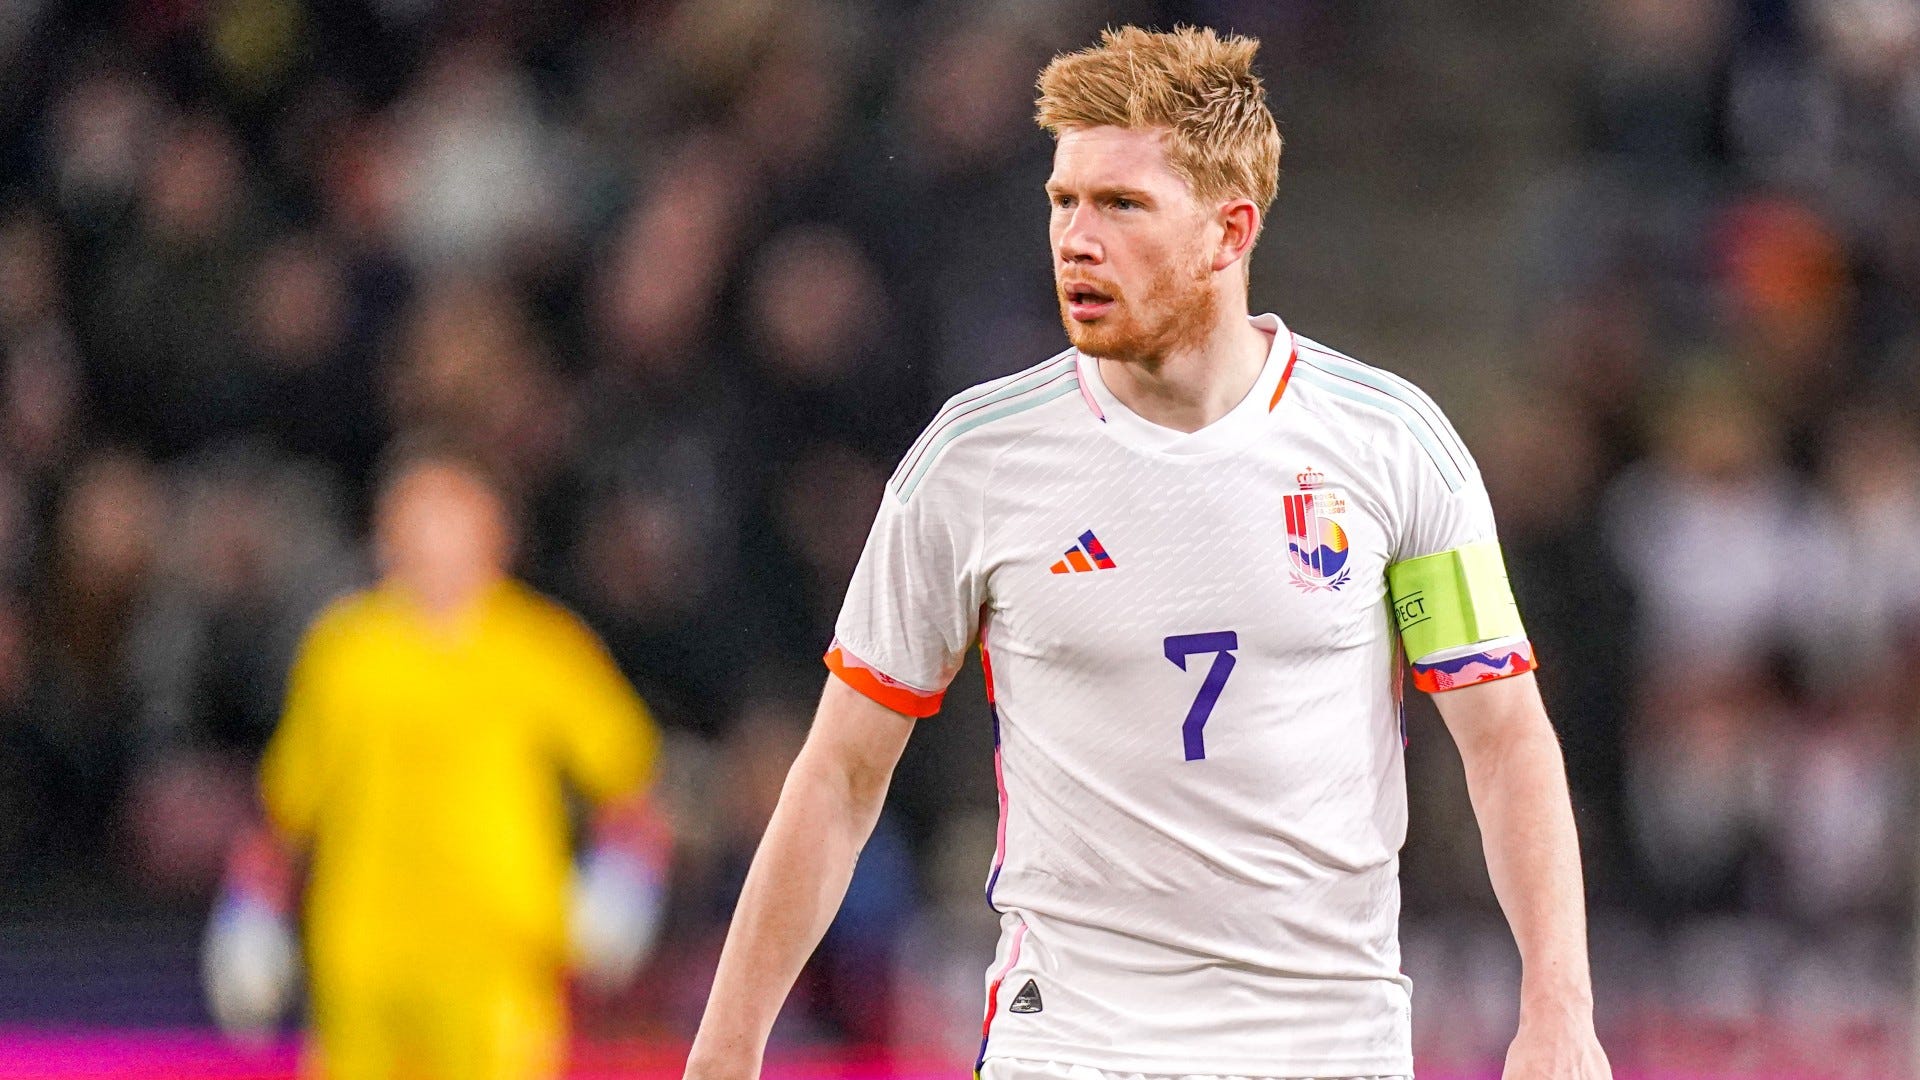 Two assists in NINE minutes for Kevin De Bruyne! Man City star on fire for Belgium ahead of huge Liverpool Premier League clash | Goal.com UK